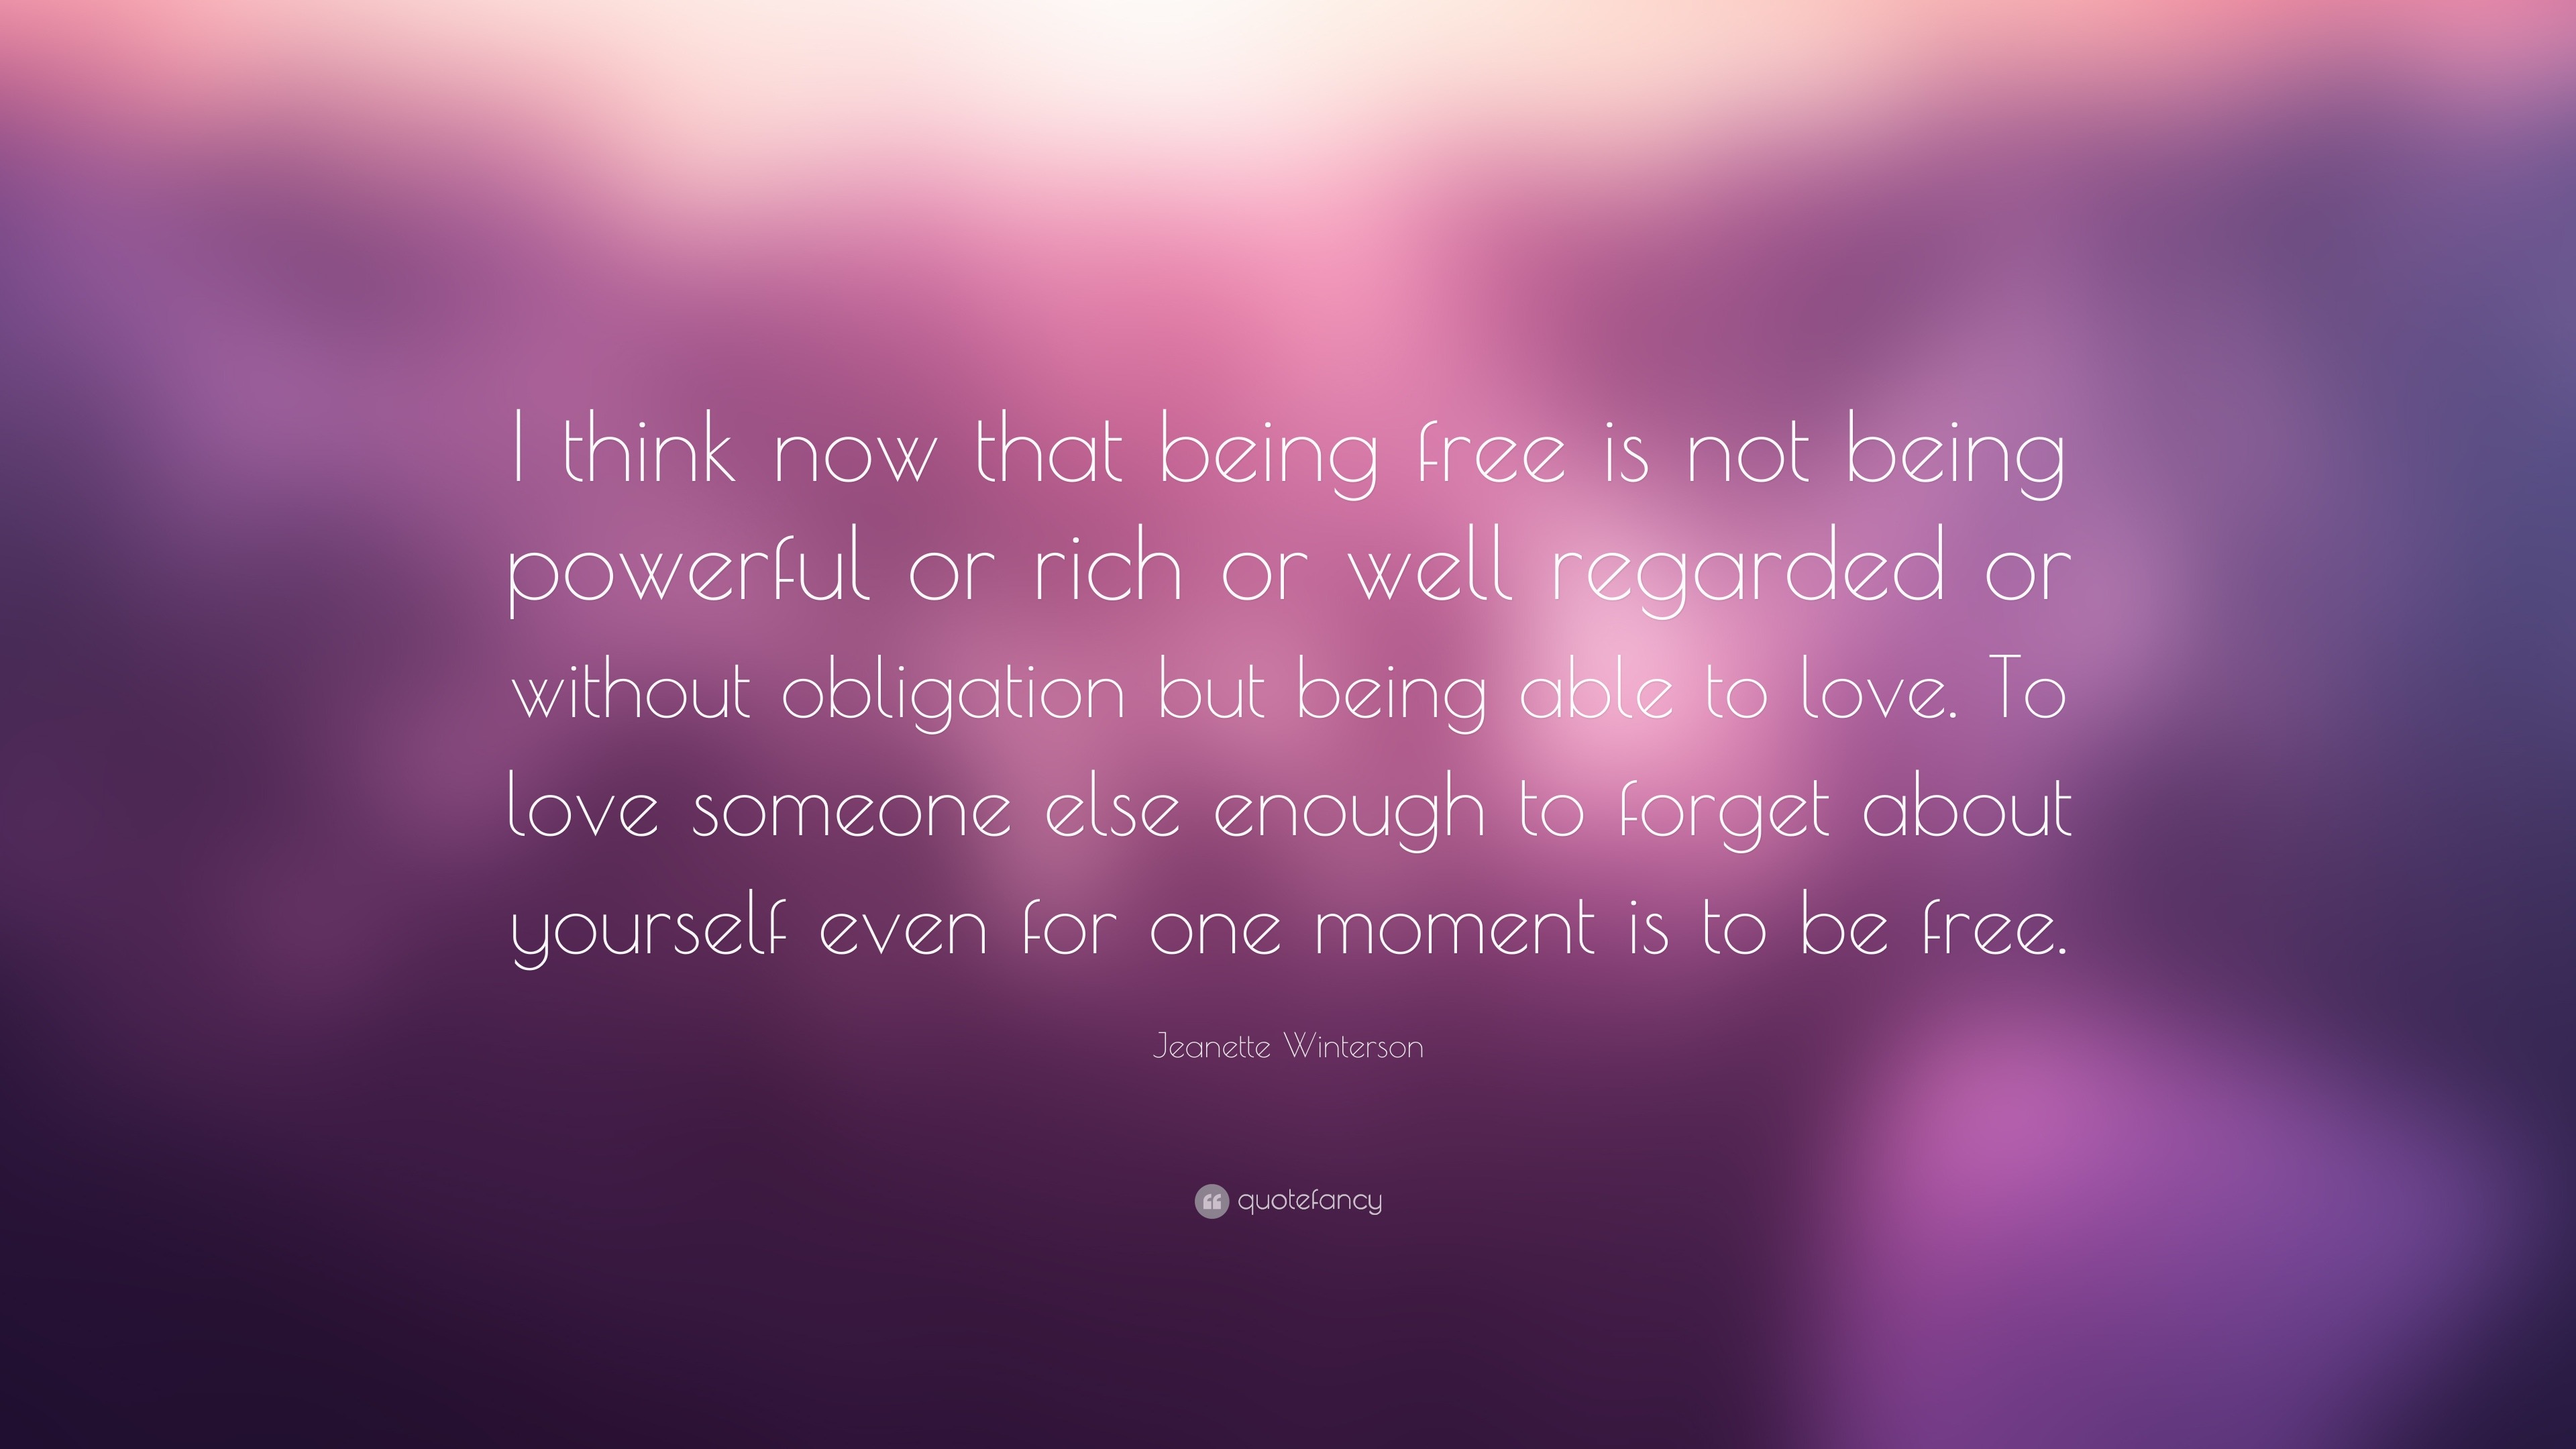 Jeanette Winterson Quote “I think now that being free is not being powerful or